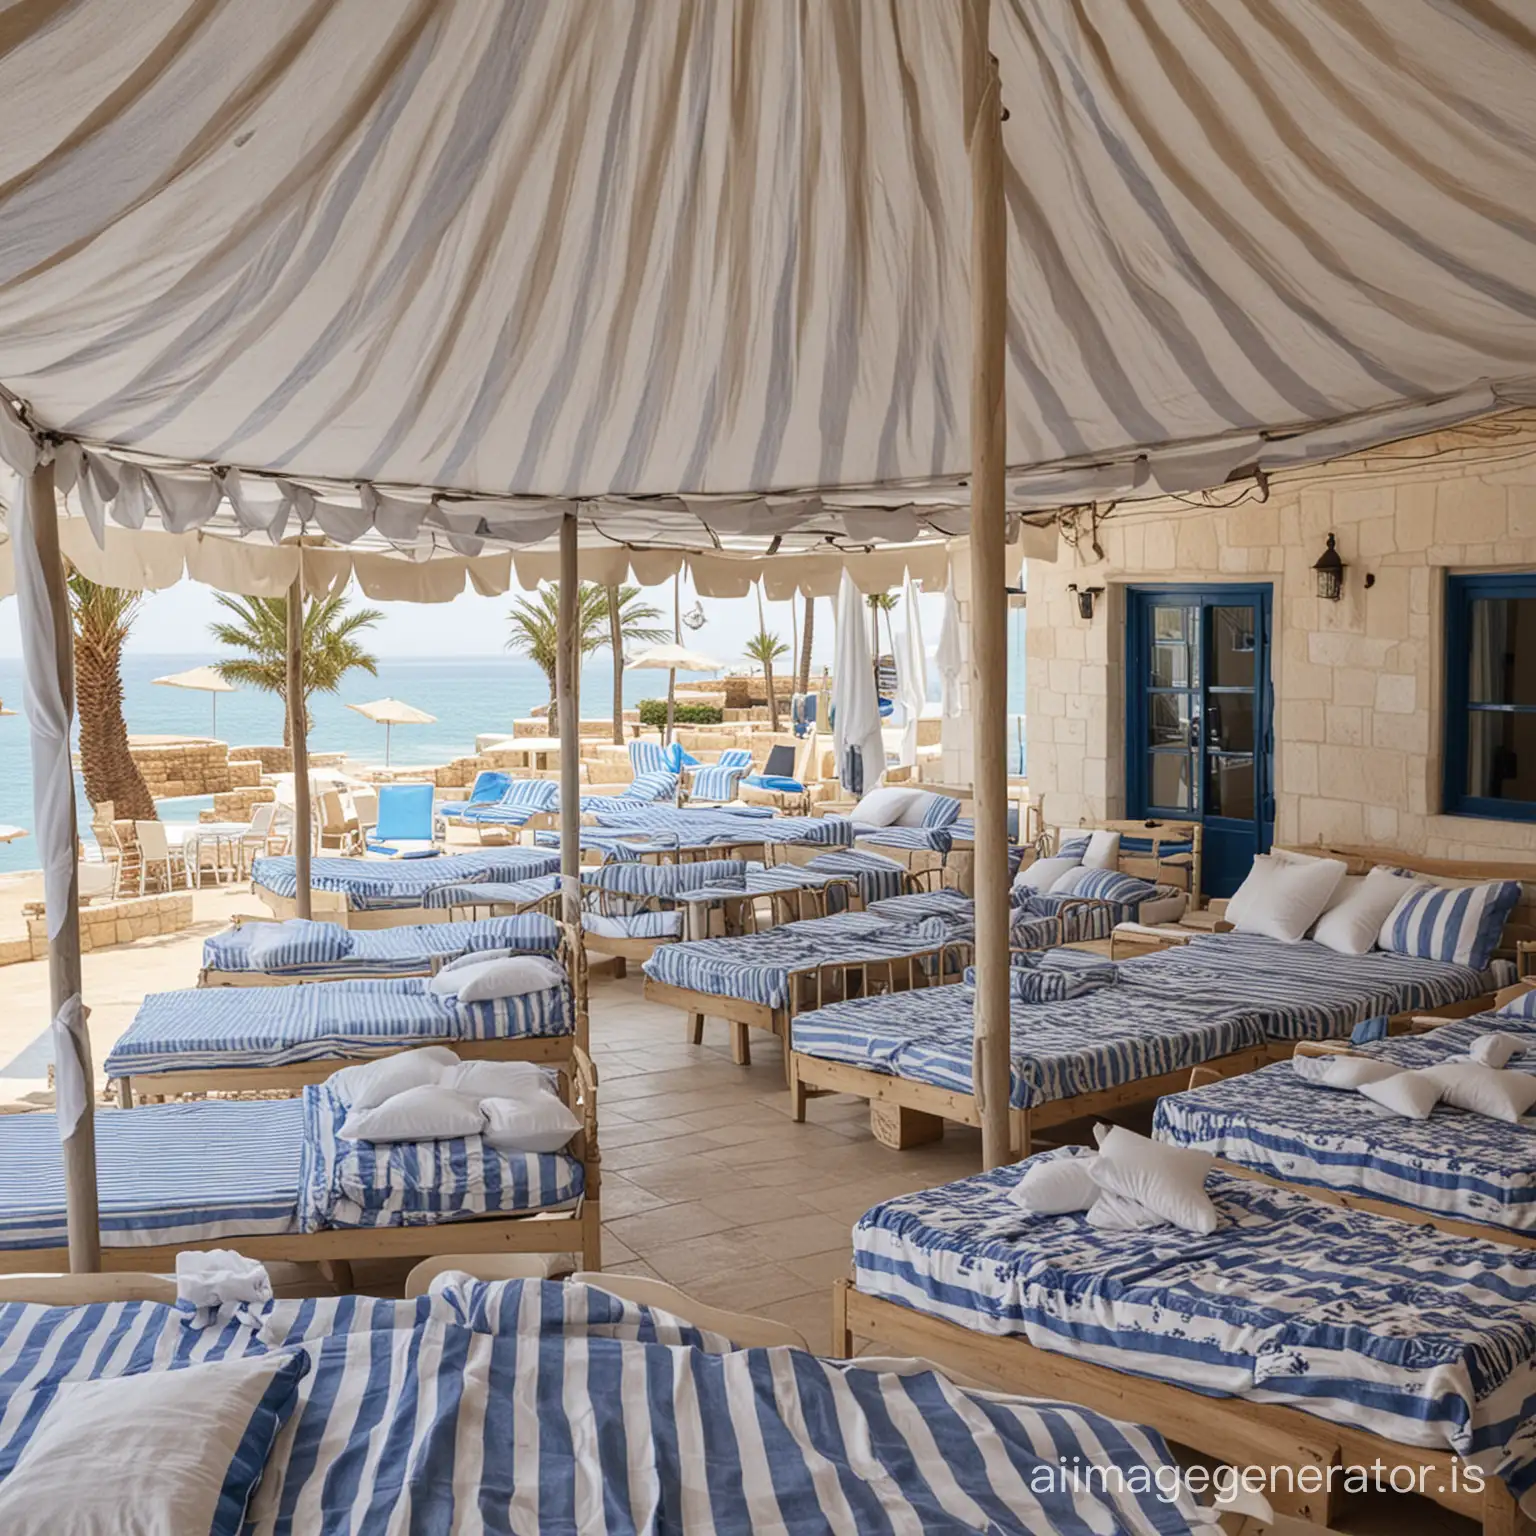 I want Batroun Village club in Batroun, Lebanon, with the mood of blue and white stripped beds and parasols